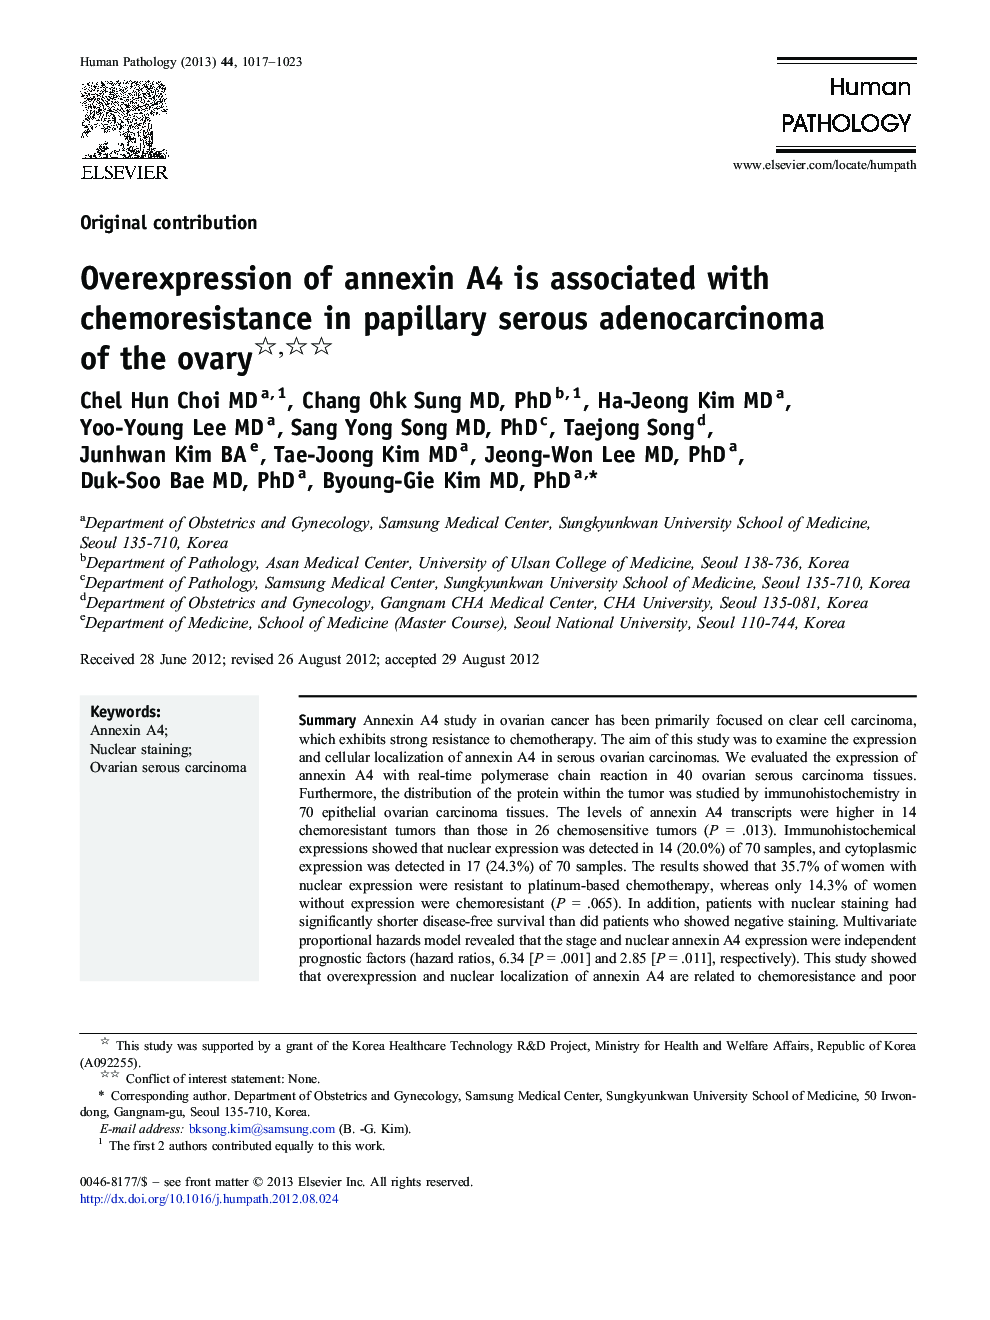 Overexpression of annexin A4 is associated with chemoresistance in papillary serous adenocarcinoma of the ovary 